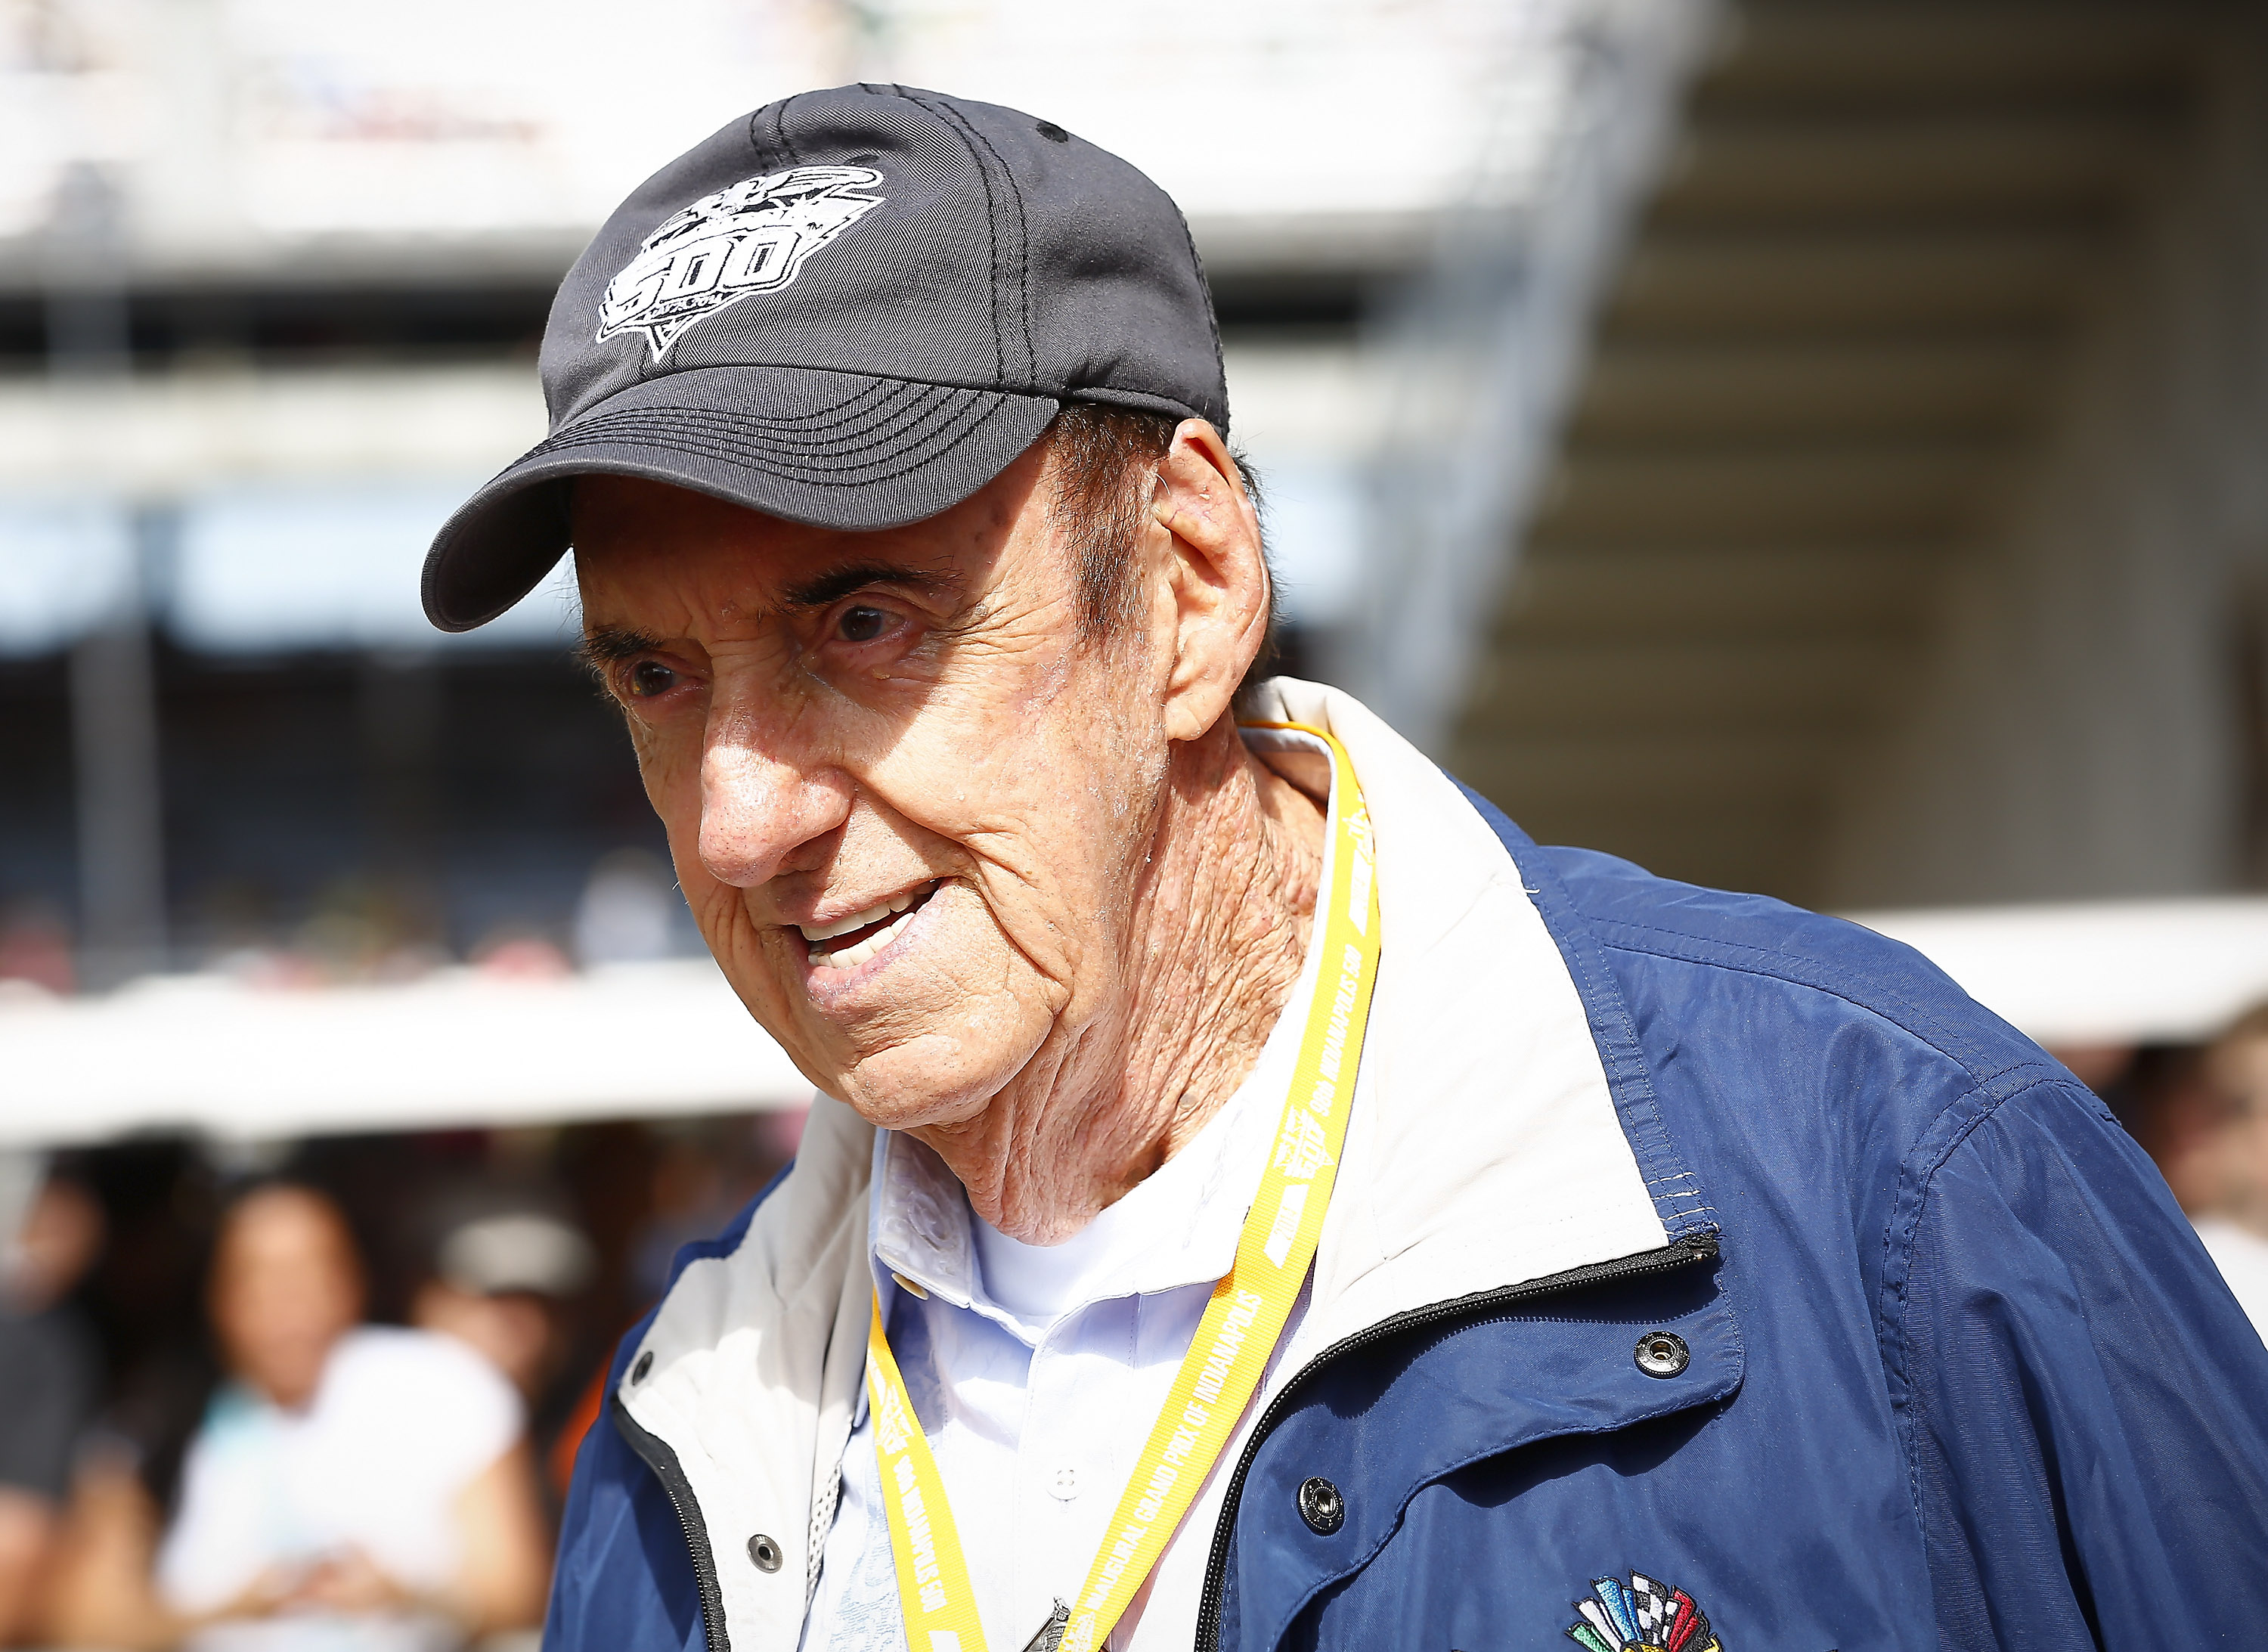 Jim Nabors attends the 2014 Indy 500 at Indianapolis Motorspeedway on May 25, 2014, in Indianapolis, Indiana. | Source: Getty Images